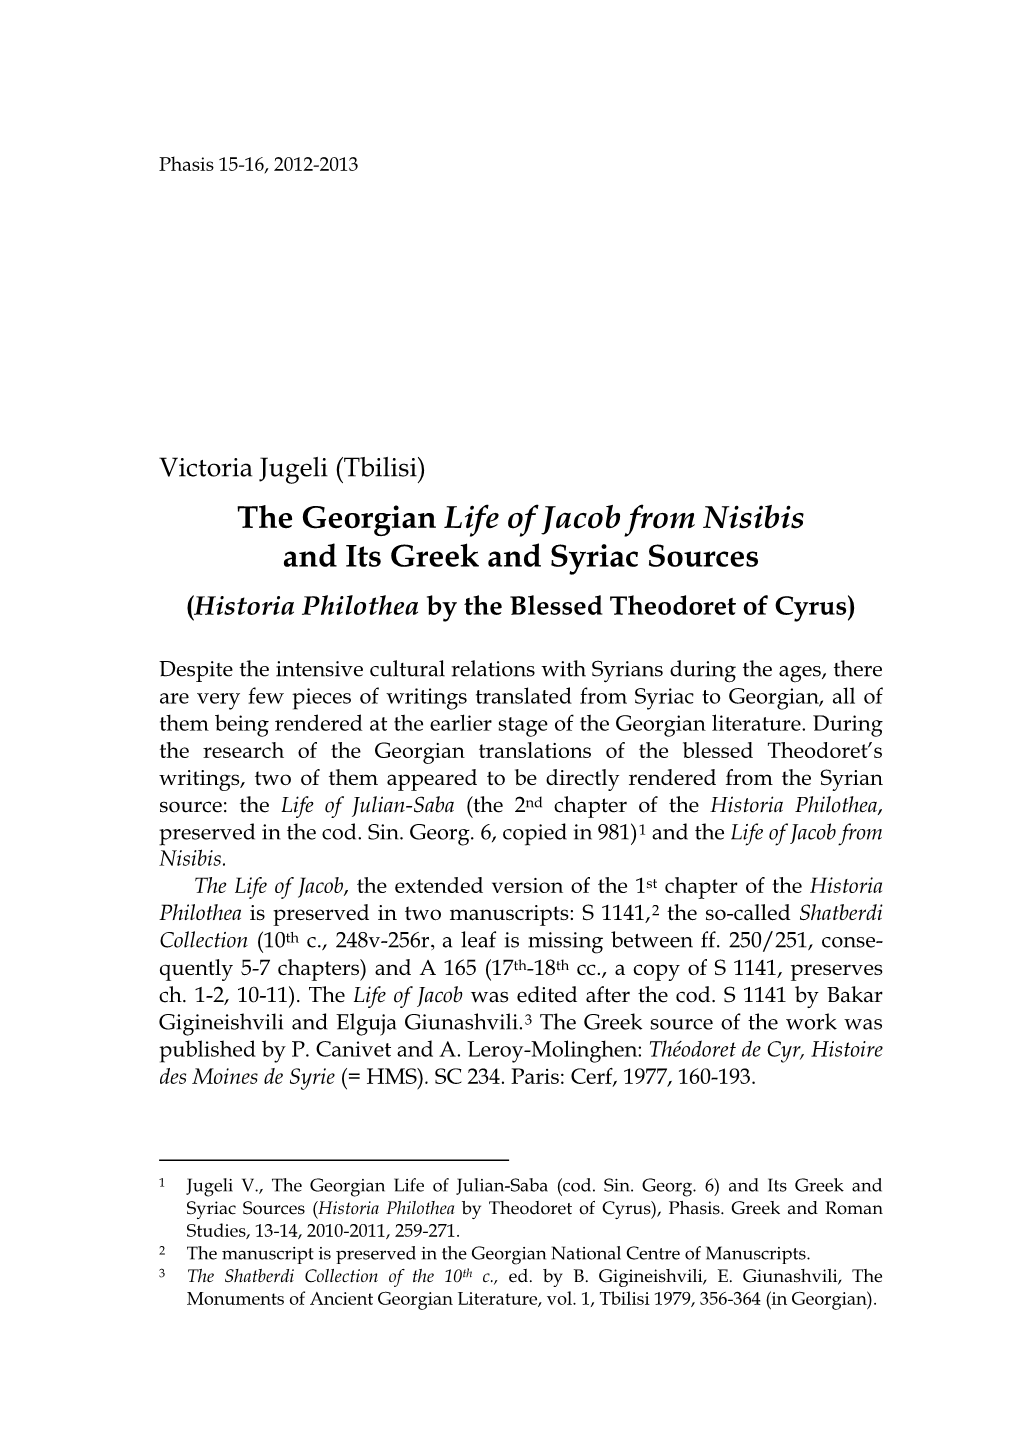 The Georgian Life of Jacob from Nisibis and Its Greek and Syriac Sources (Historia Philothea by the Blessed Theodoret of Cyrus)